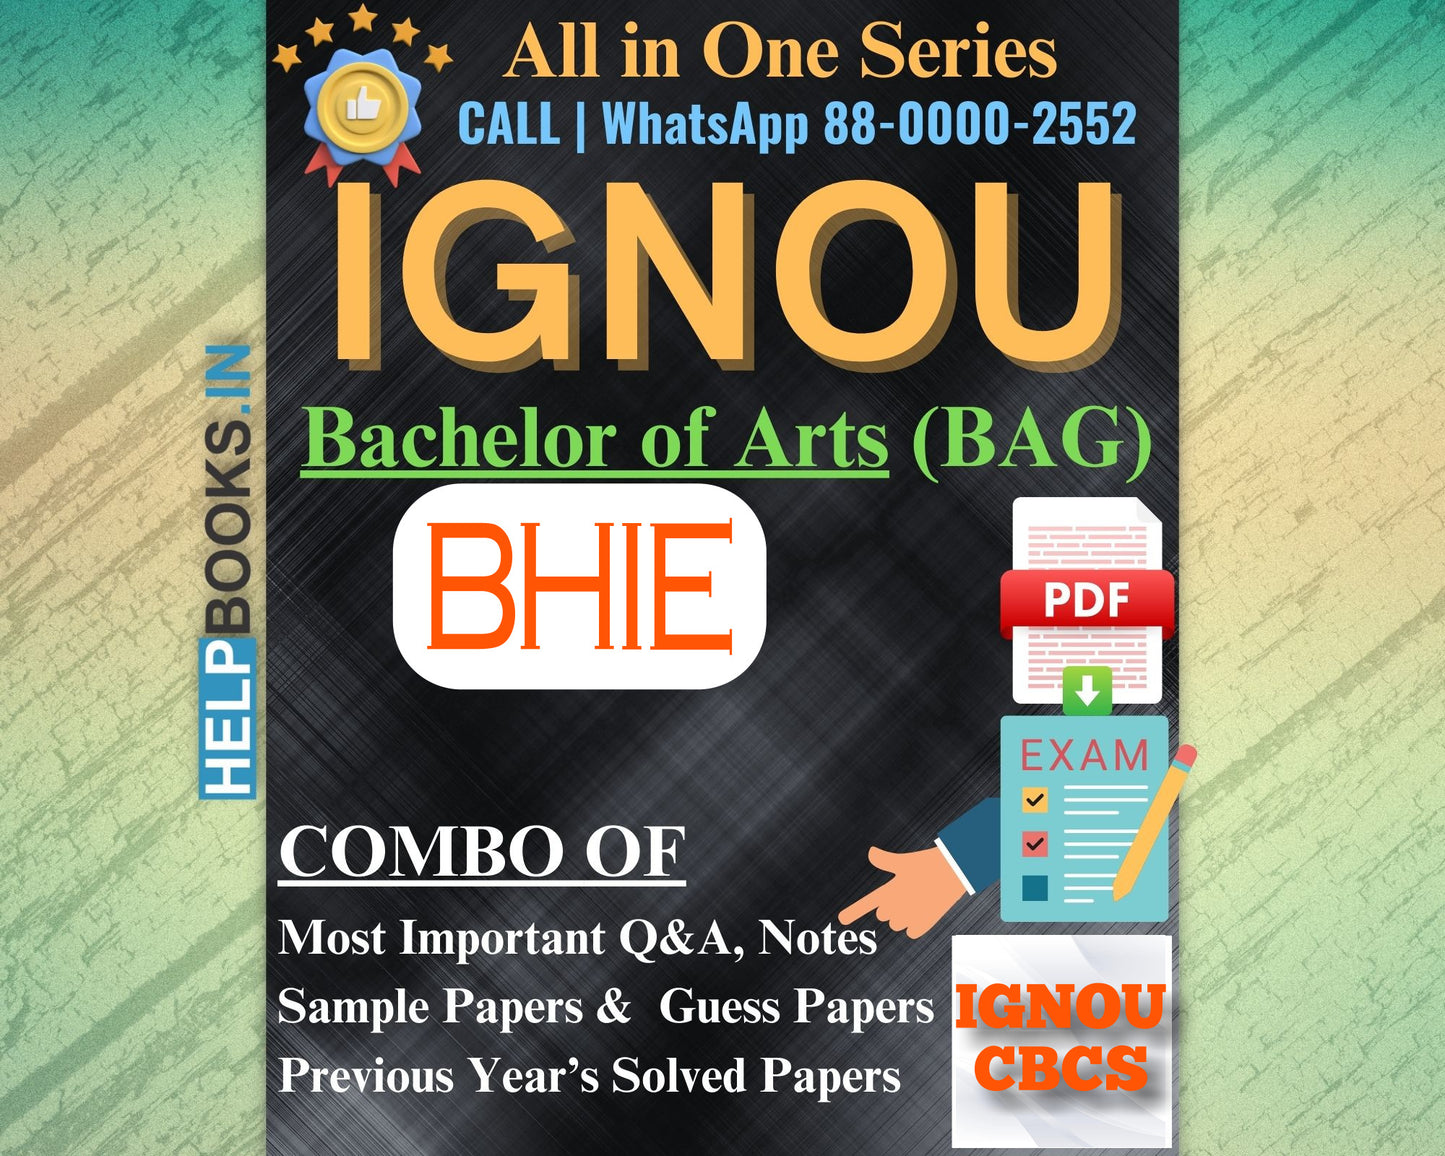 IGNOU BAG Online Study Package: Bachelor of Arts (BA) - Previous Year’s Solved Papers, Q&A, Exam Notes, Sample Papers, Guess Papers-BHIE141, BHIE142, BHIE143, BHIE144, BHIE145